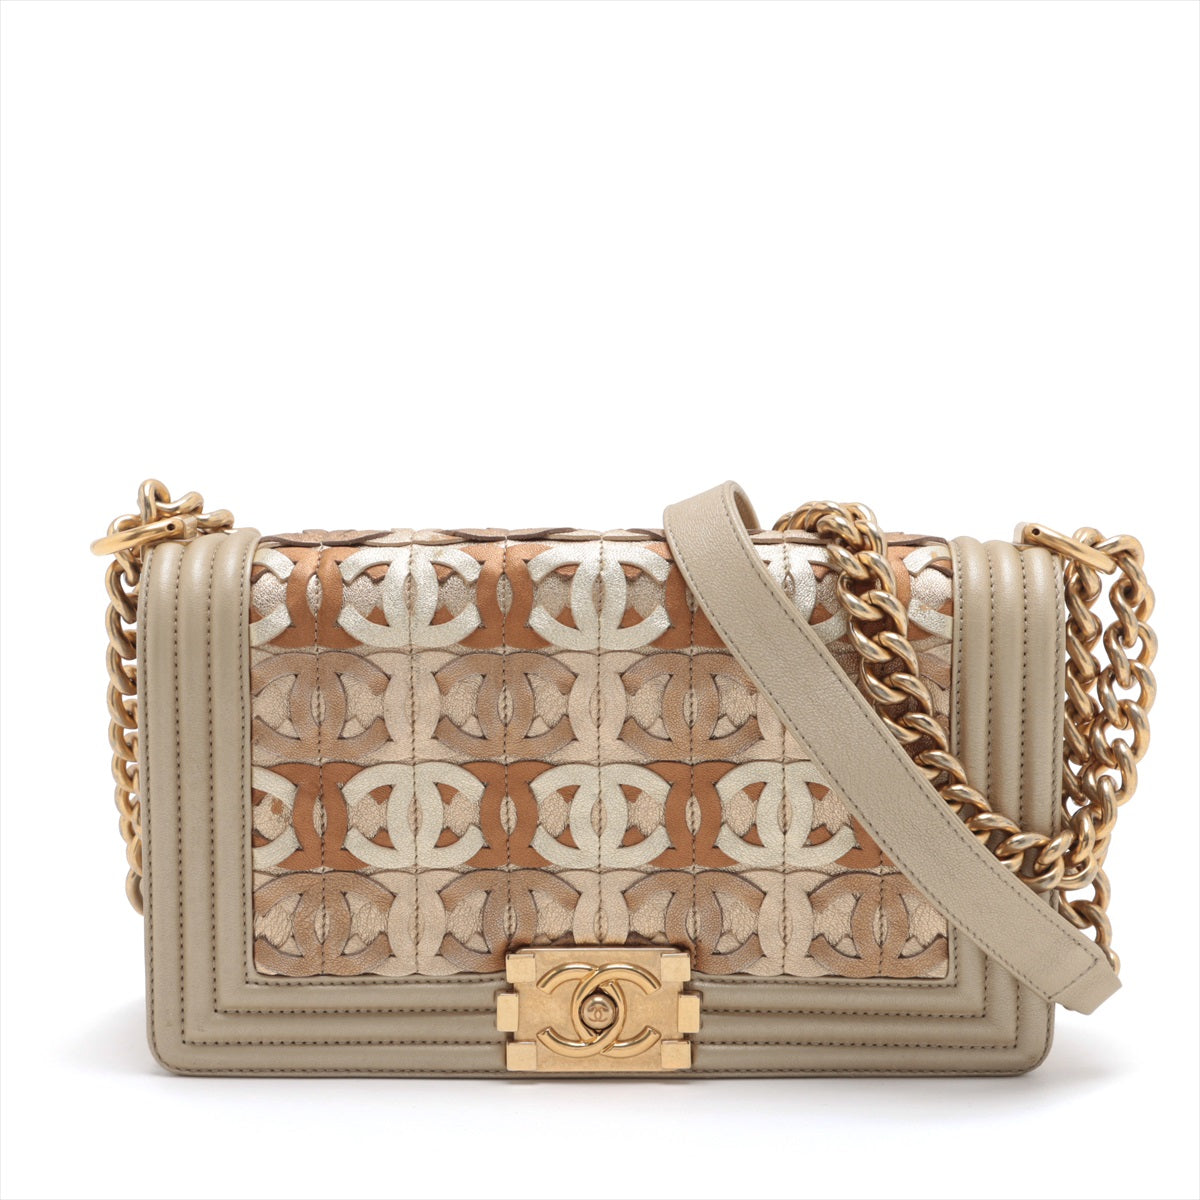 Chanel Boy Chanel Leather Chain Shoulder Bag Coco Mark Beige×Brown Gold Metal Fittings 20XXXXXX